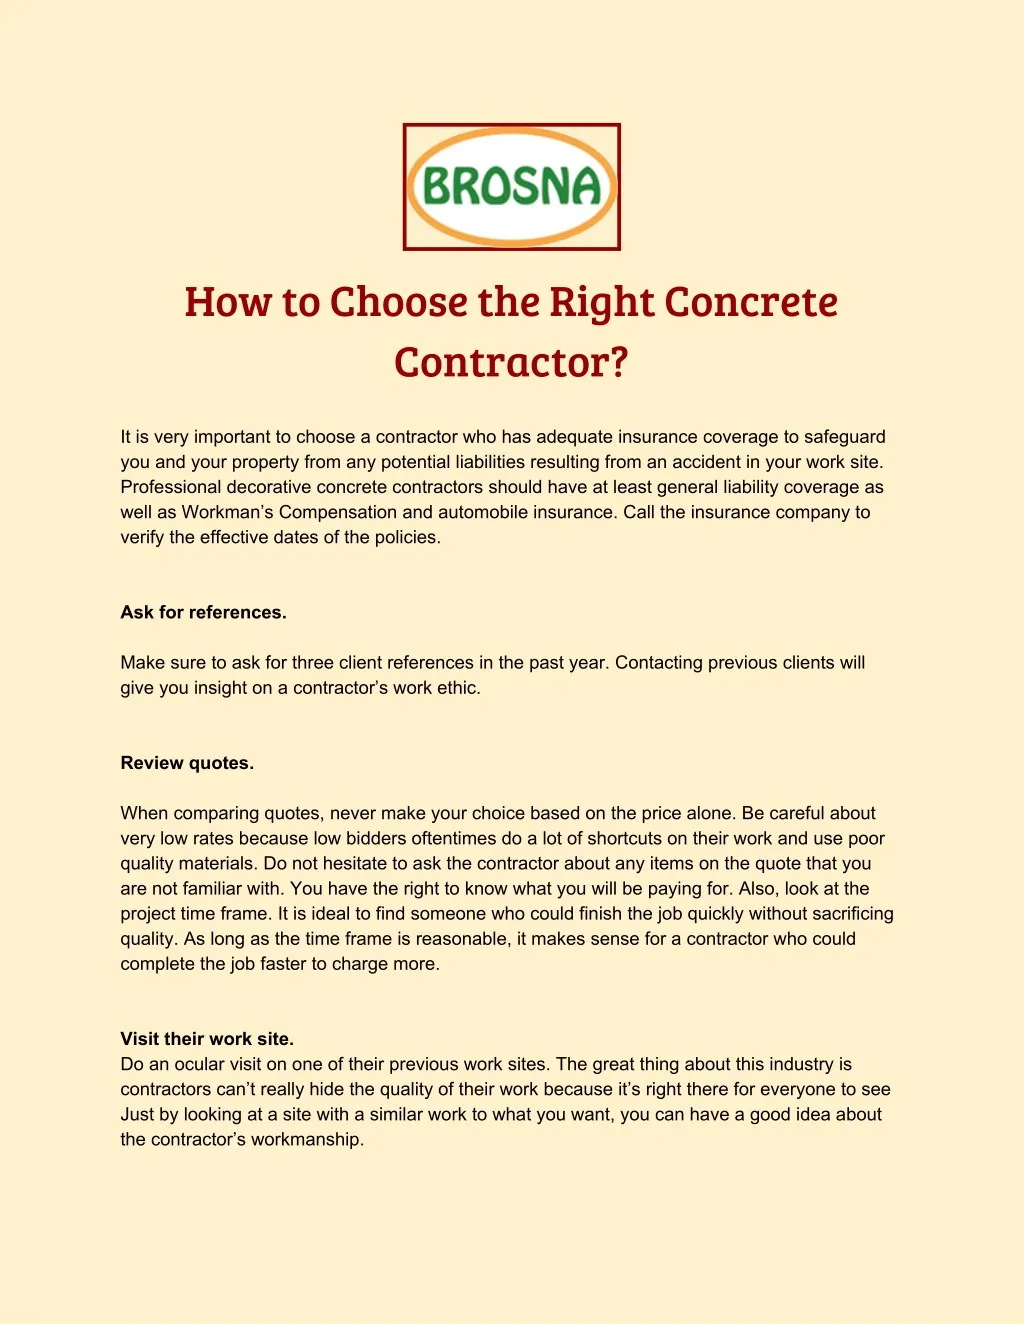 how to choose the right concrete contractor